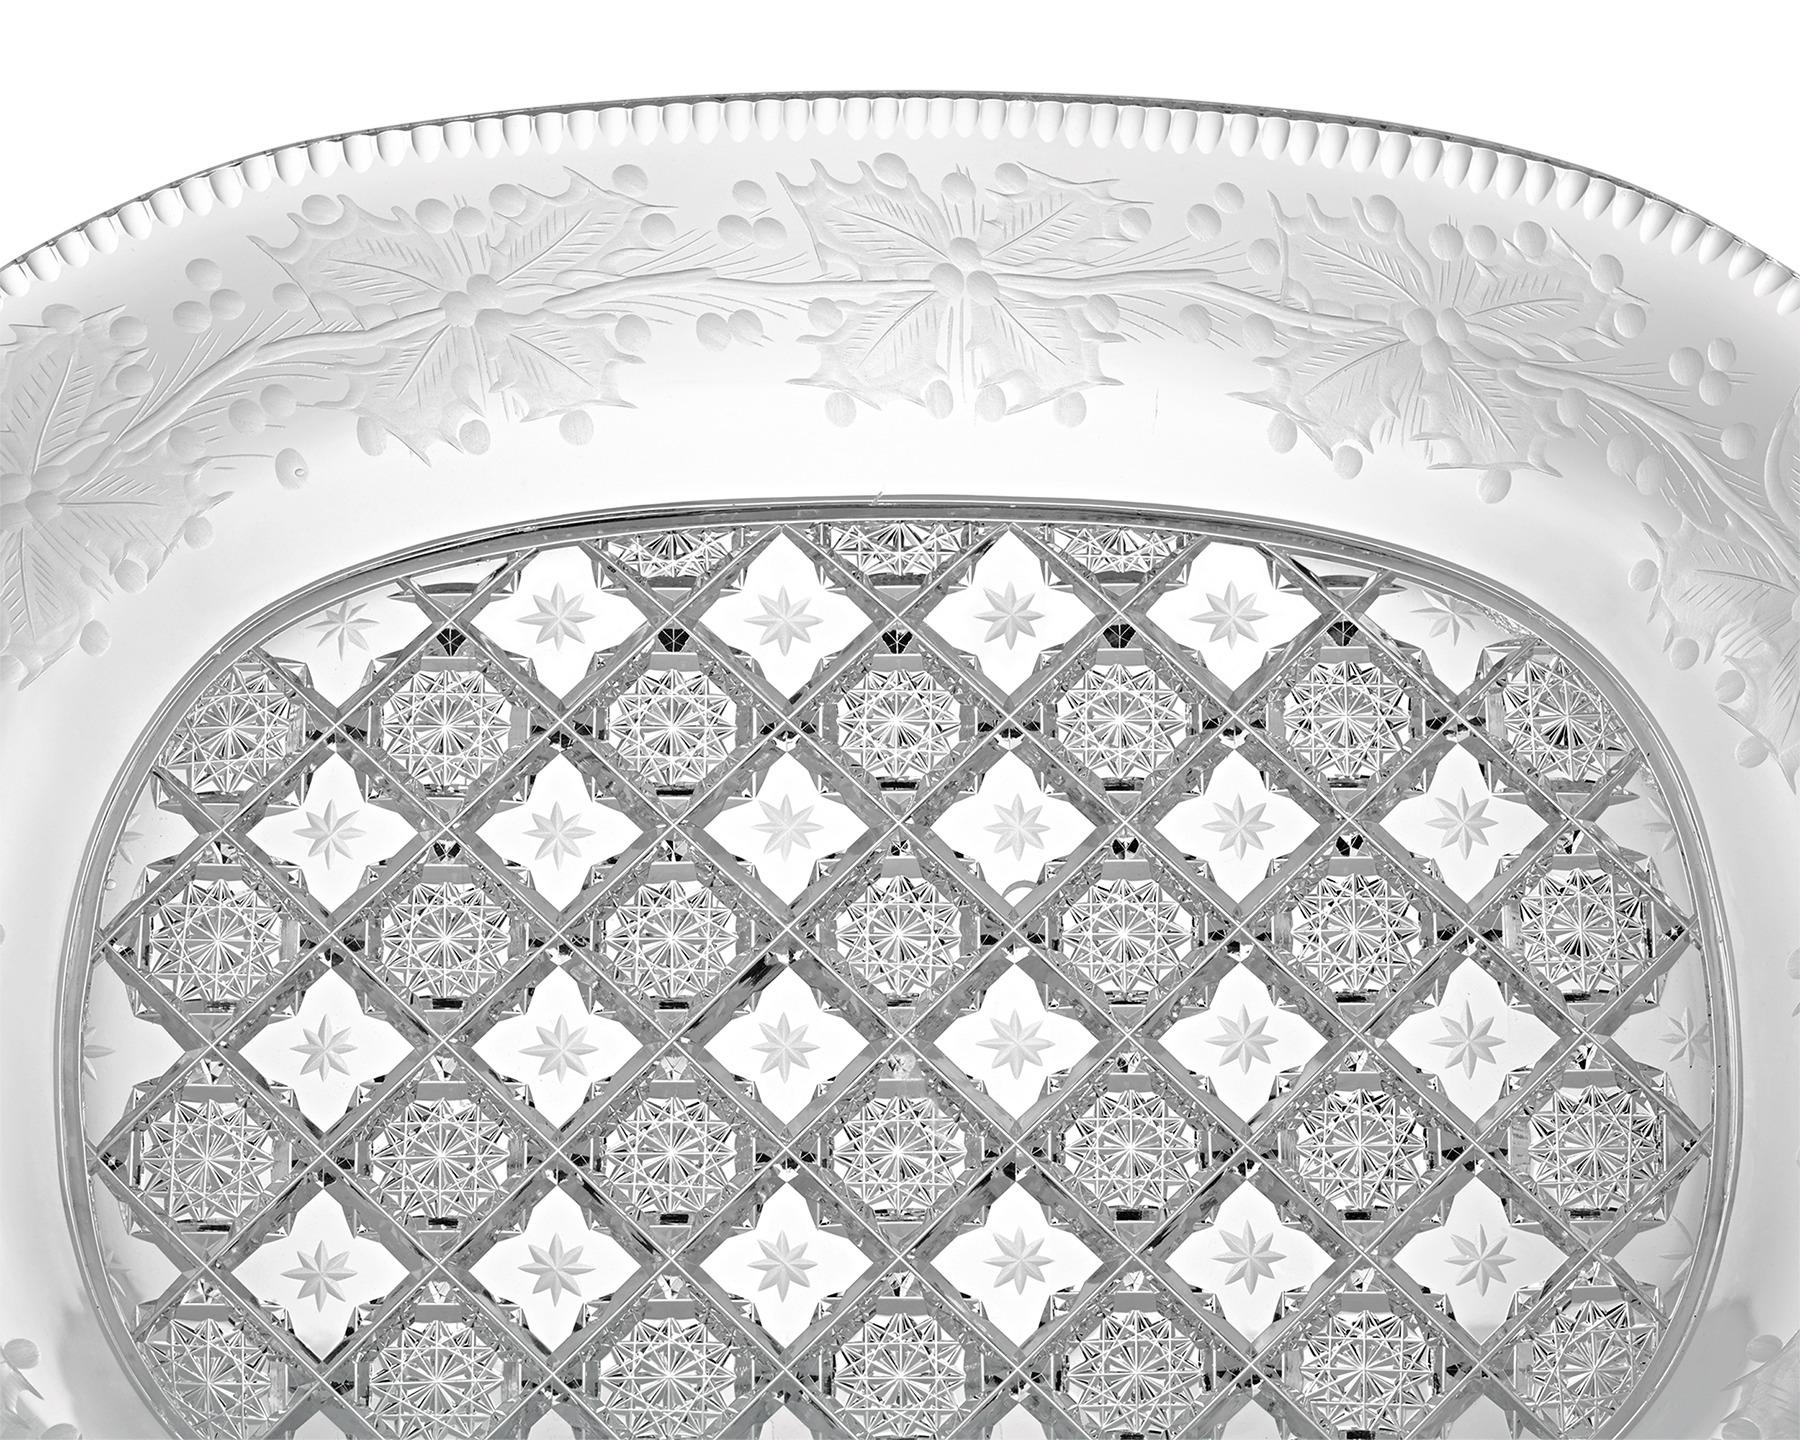 The festive Snowflakes and Holly pattern adorns this glass platter by H. P. Sinclaire & Company. Patented by Henry Purdon Sinclaire, Jr. in 1911, the popular motif features holly berry and leaf engraving along the rim, while the base is cut in a